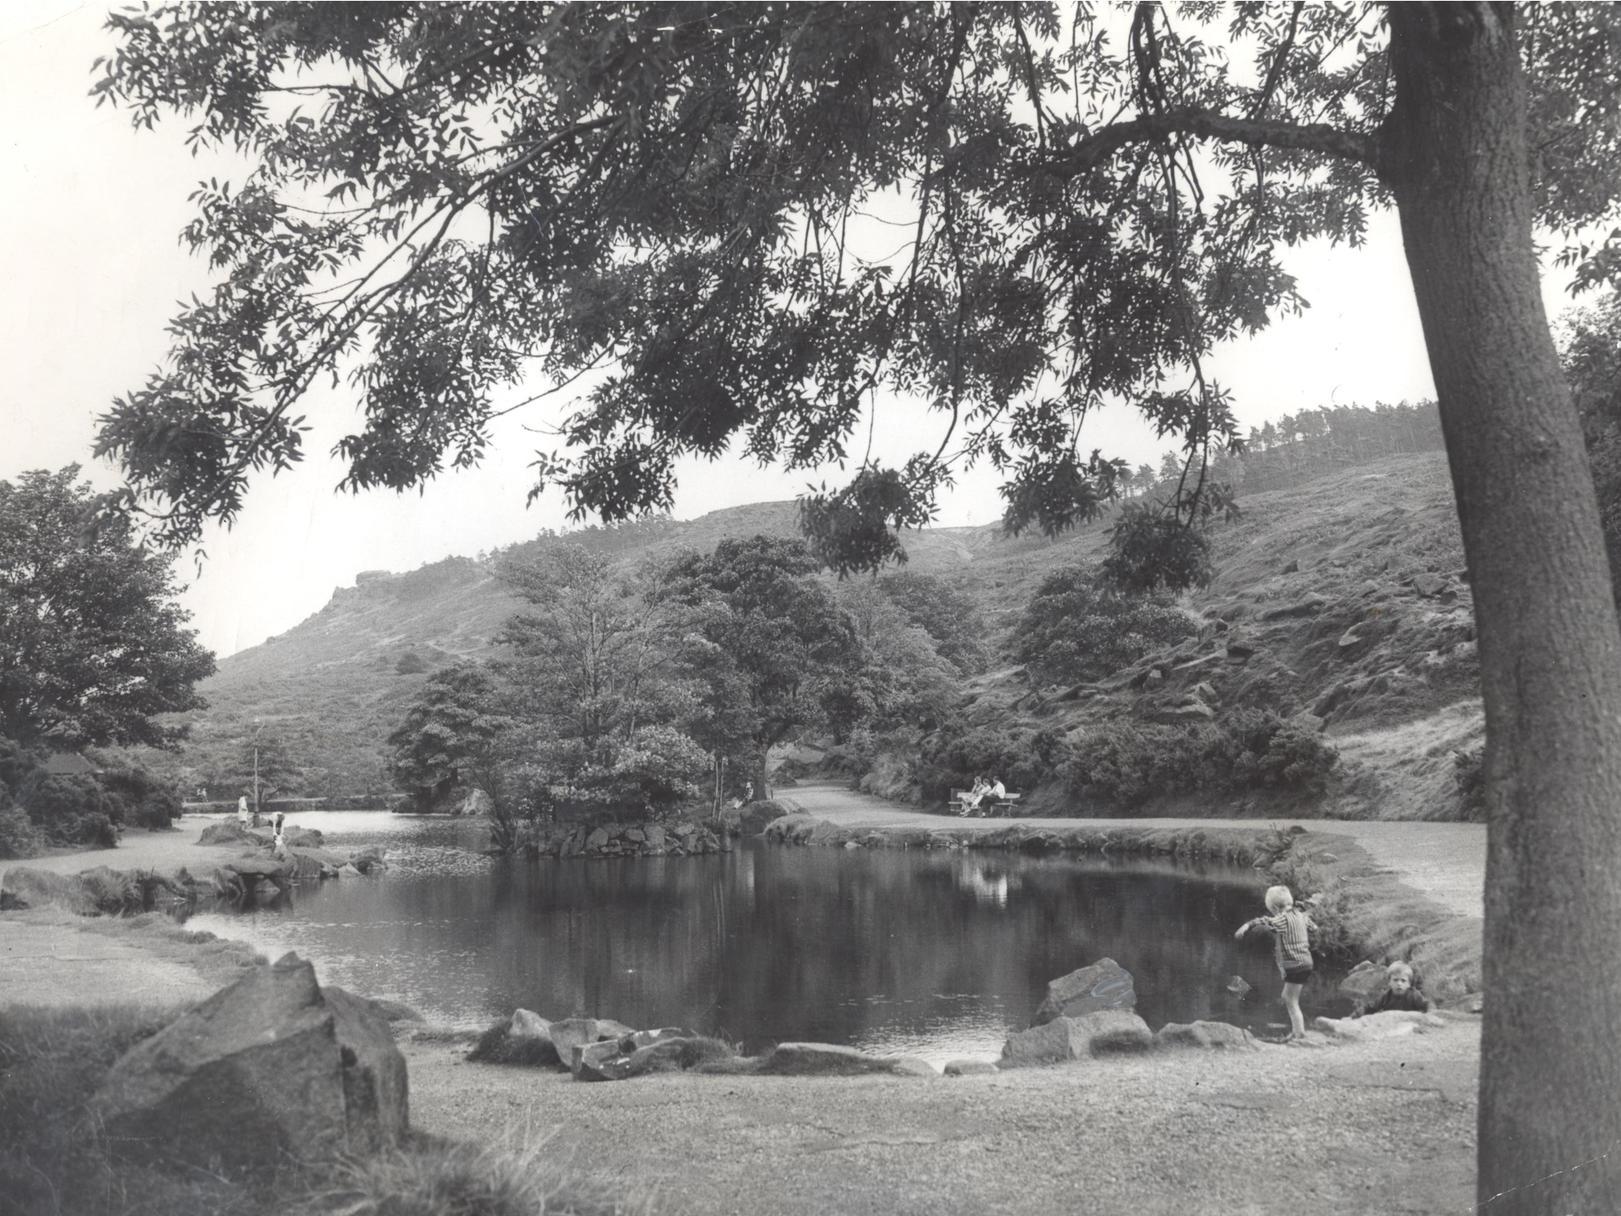 This scene is of Ilkley Tarn, a popular place in both summer and winter.